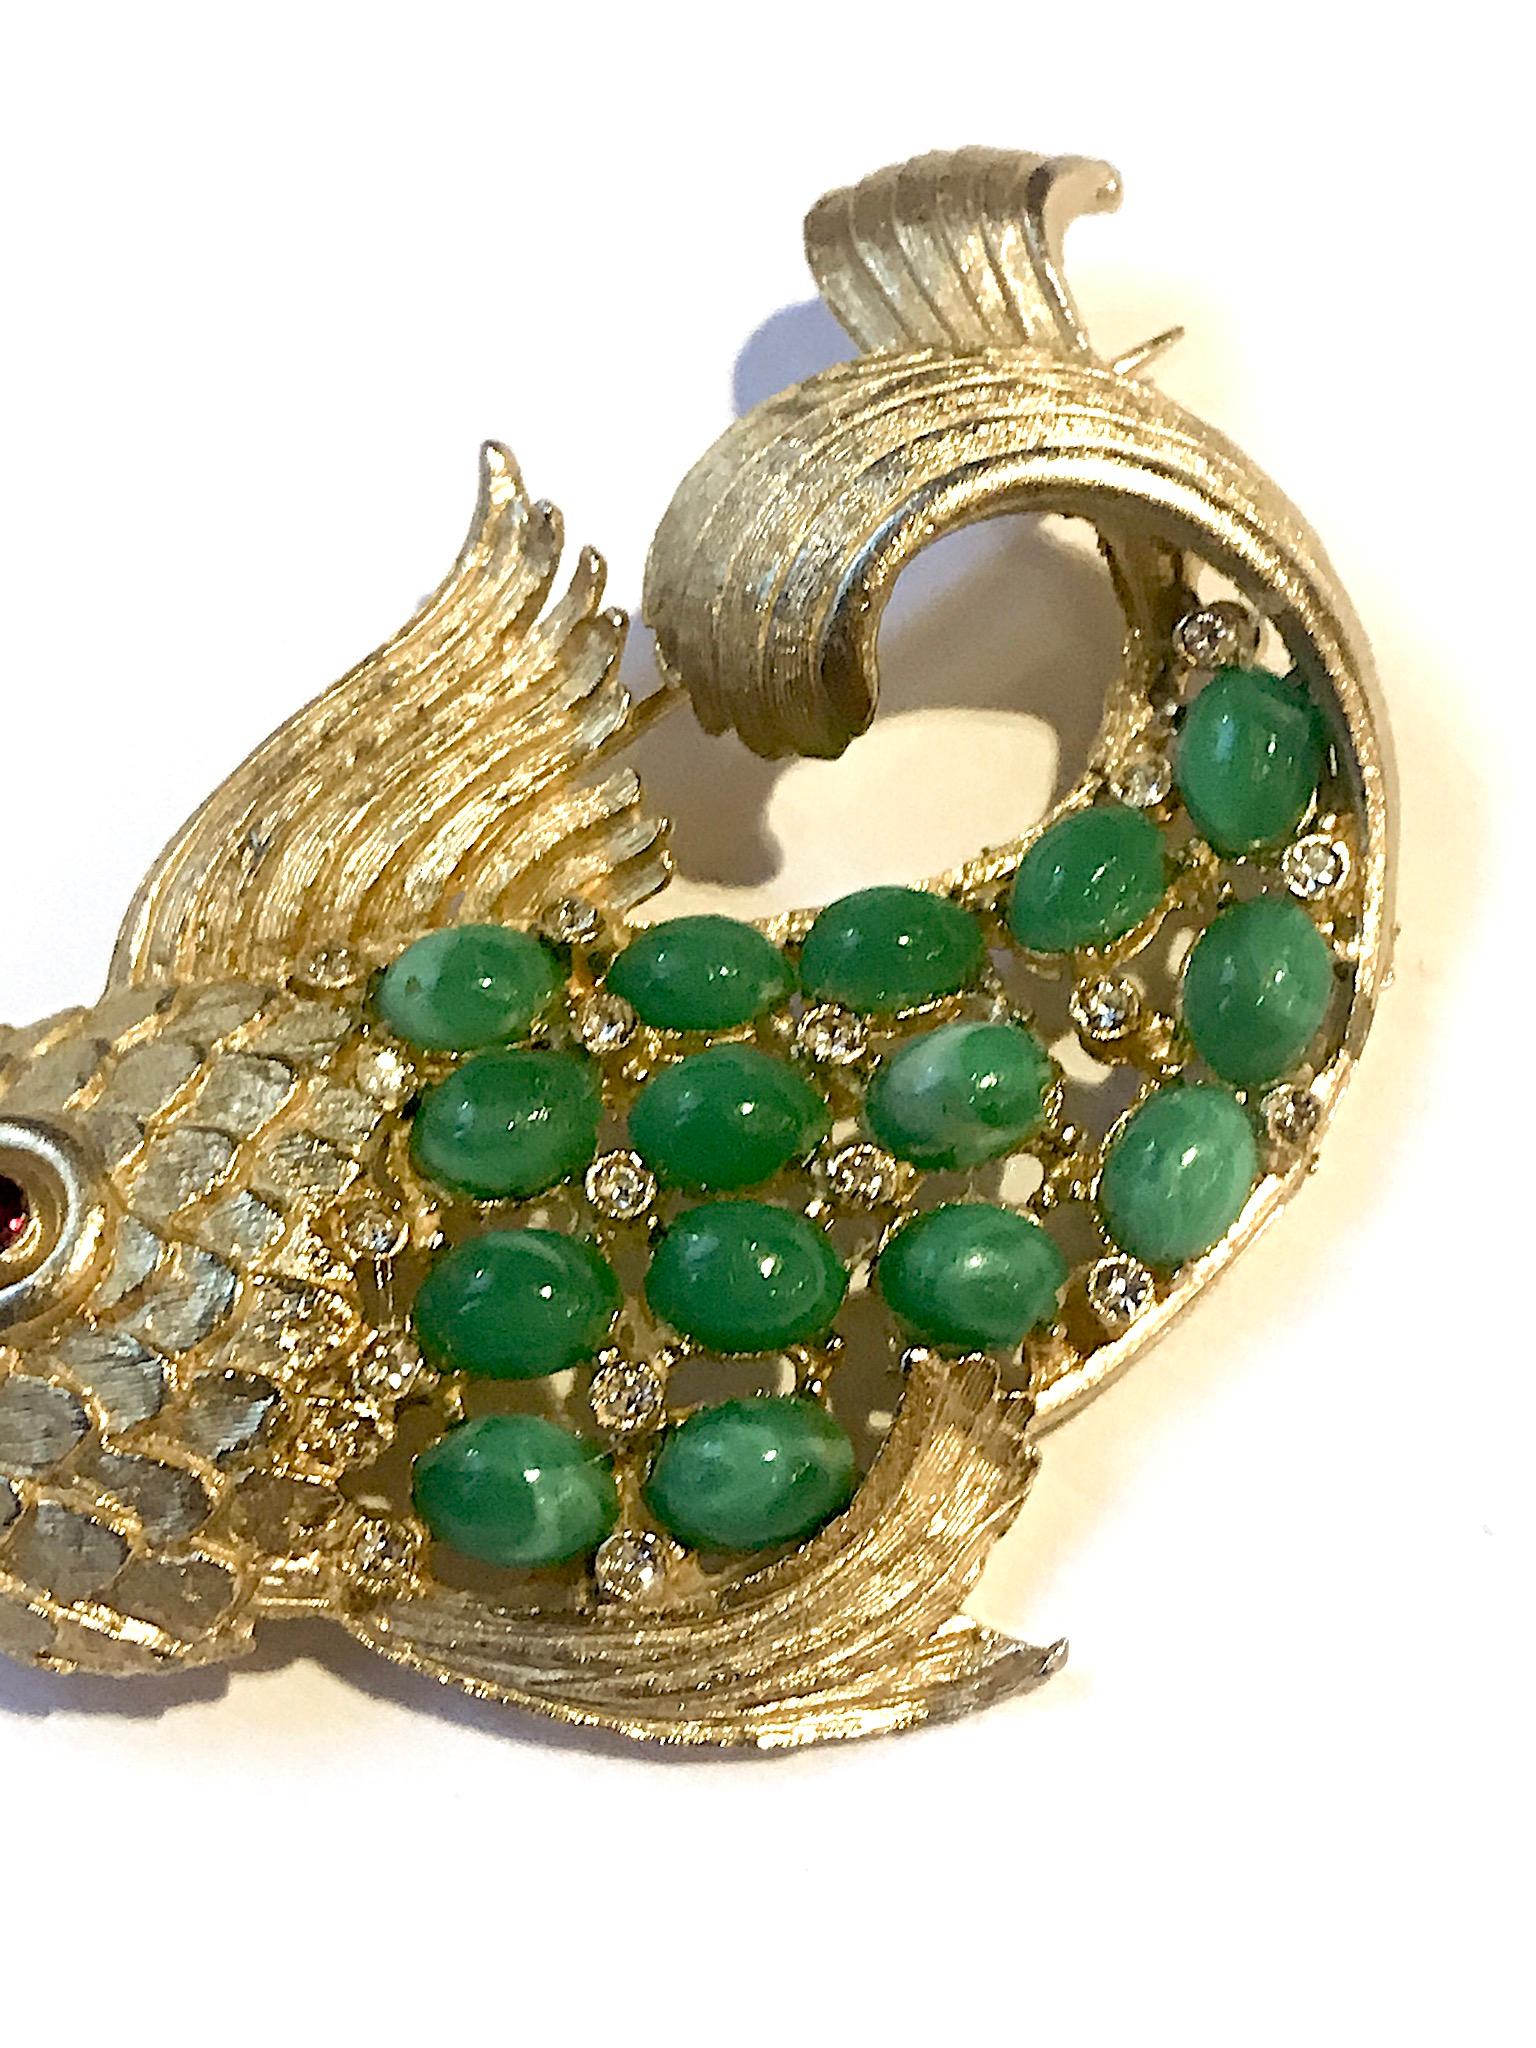 1950s Satin Gold Figural Brooch of Fish with Green Cabochon 3